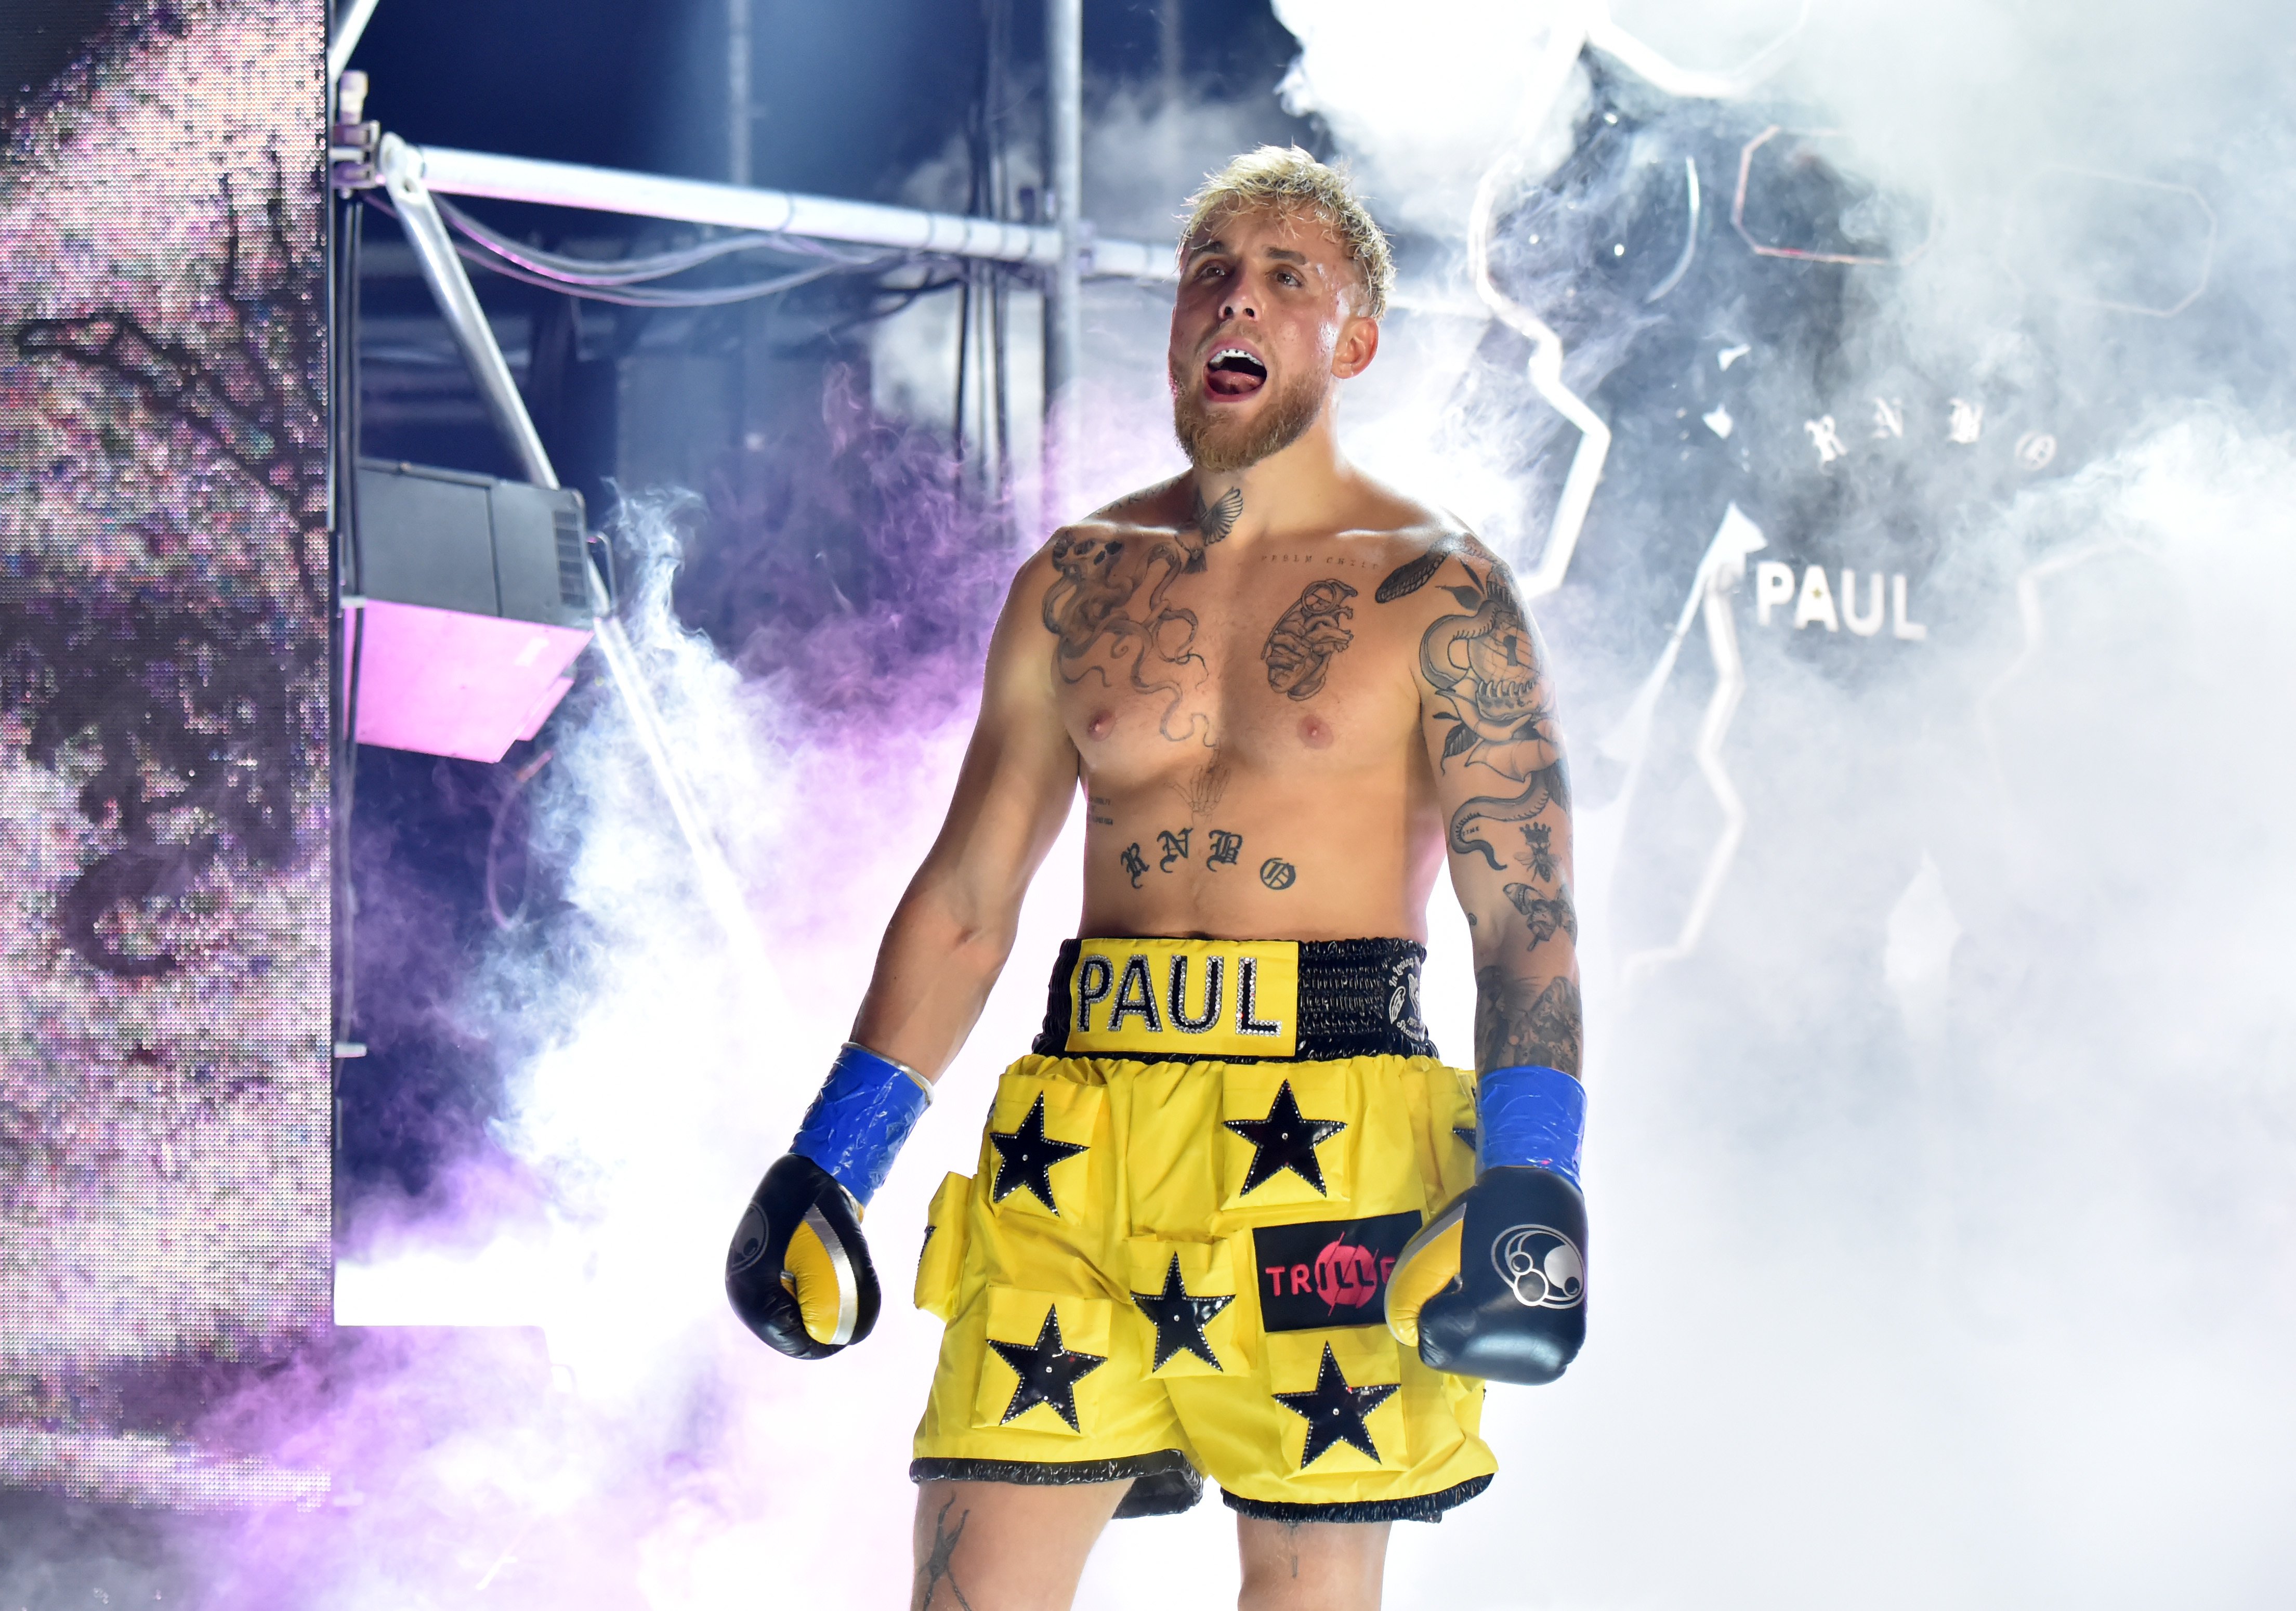 Jake Paul enters the ring against Ben Askren for their cruiserweight bout during Triller Fight Club